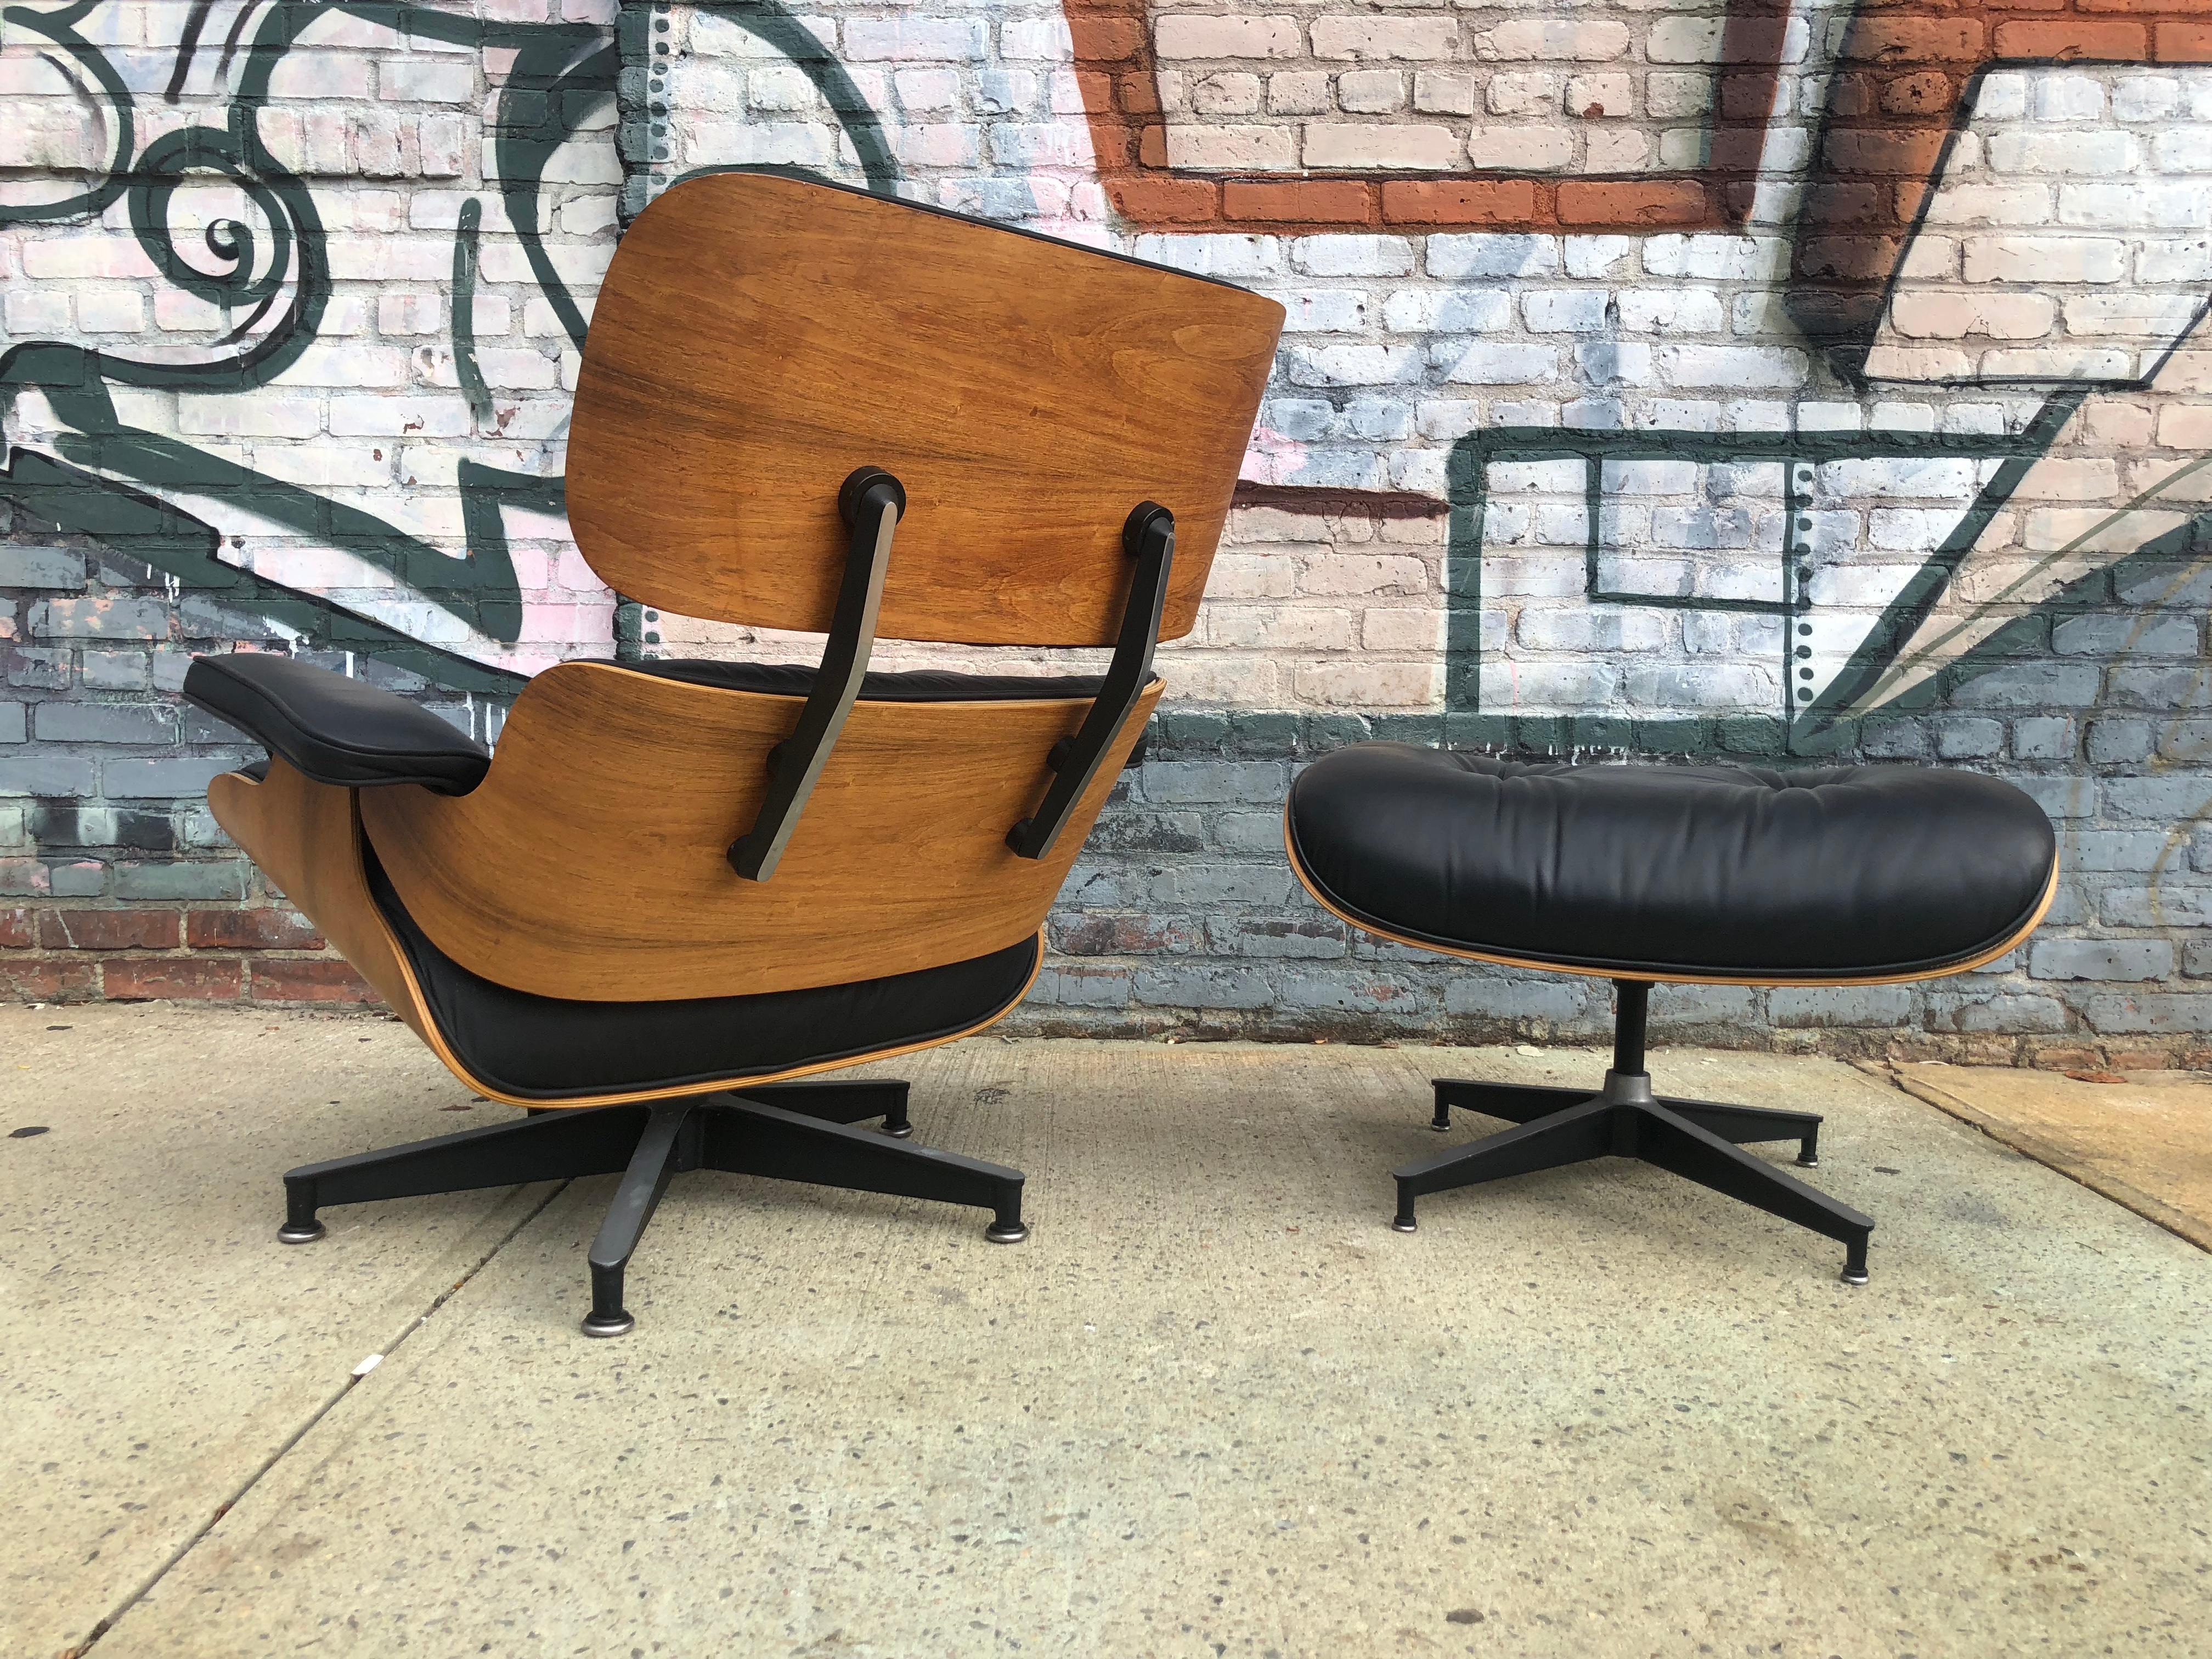 1970s edition Herman Miller Eames lounge chair and ottoman. Leather and wood immaculate. Annoriginal pait with all original leather. Signed on chair and ottoman.